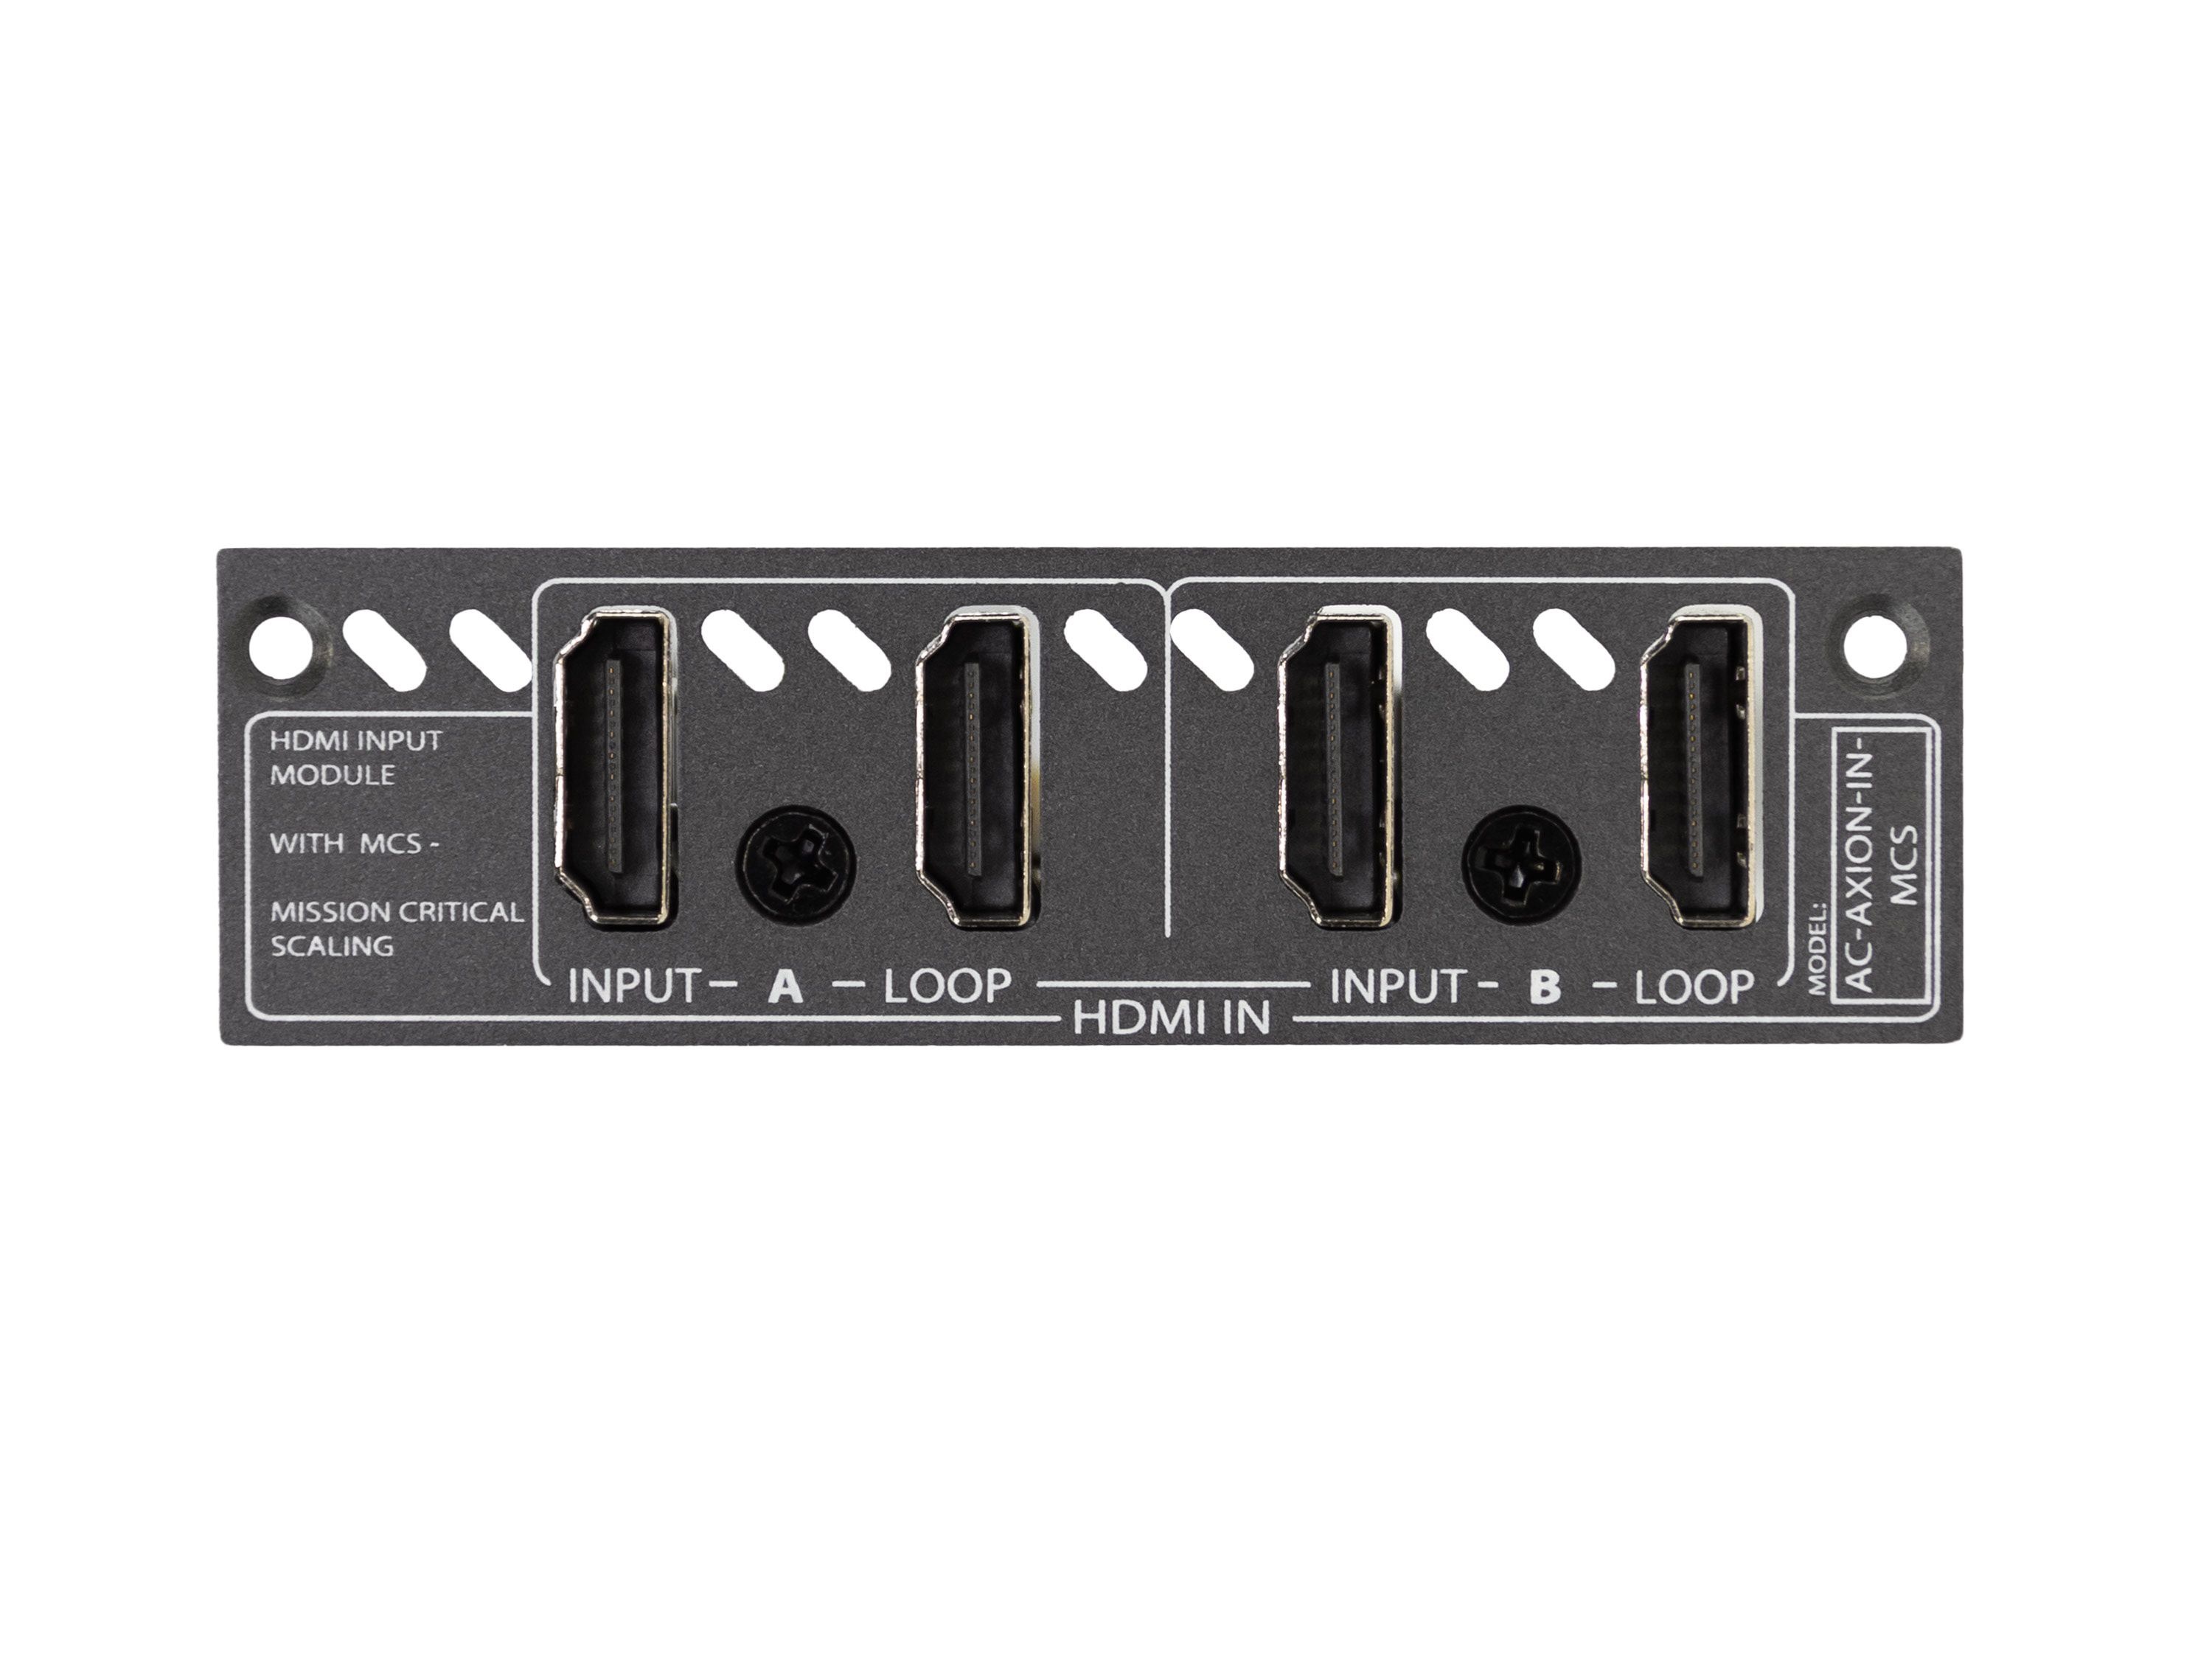 AC-AXION-IN-MCS Dual 18Gbps HDMI Input Ports with Dual HDMI Loop Out Ports and MCS Card by AVPro Edge